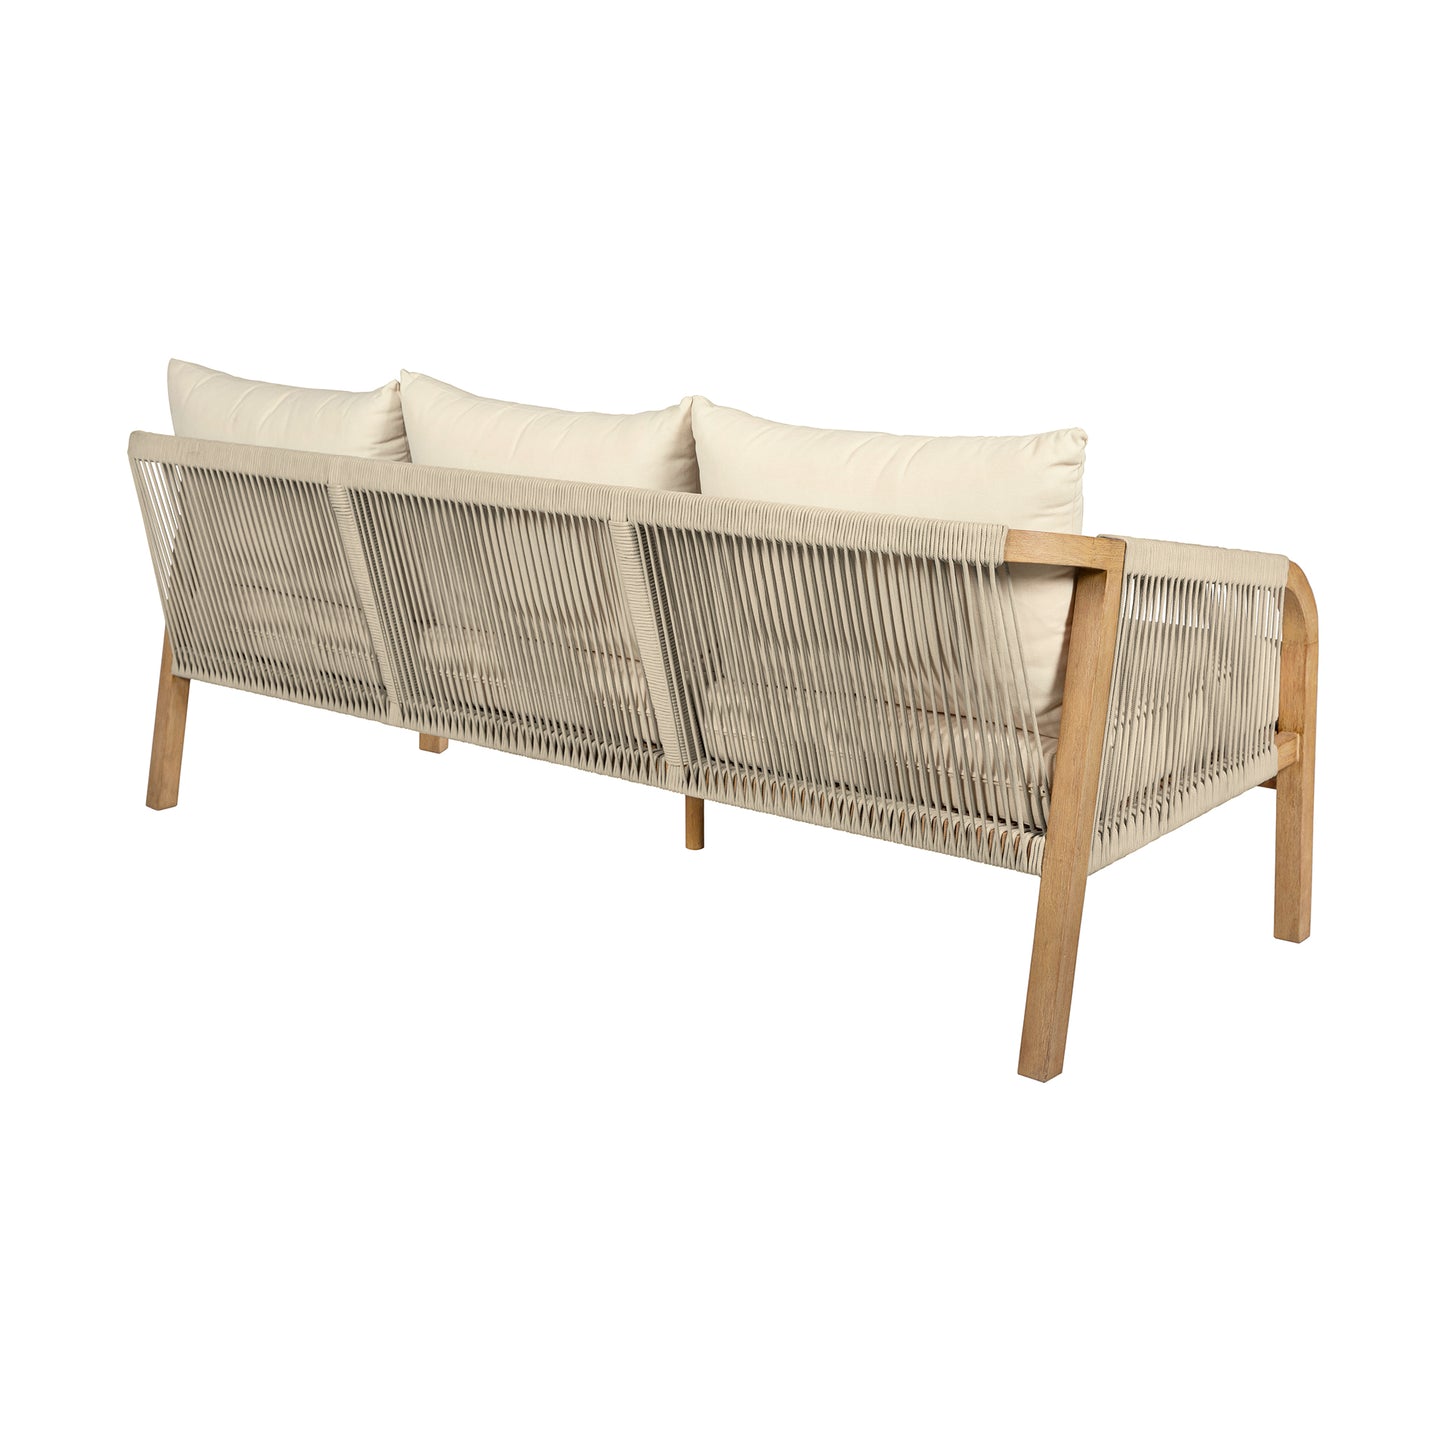 Cypress Outdoor Patio Sofa in Blonde Eucalyptus Wood and Light Gray Rope with Ivory Olefin Cushions